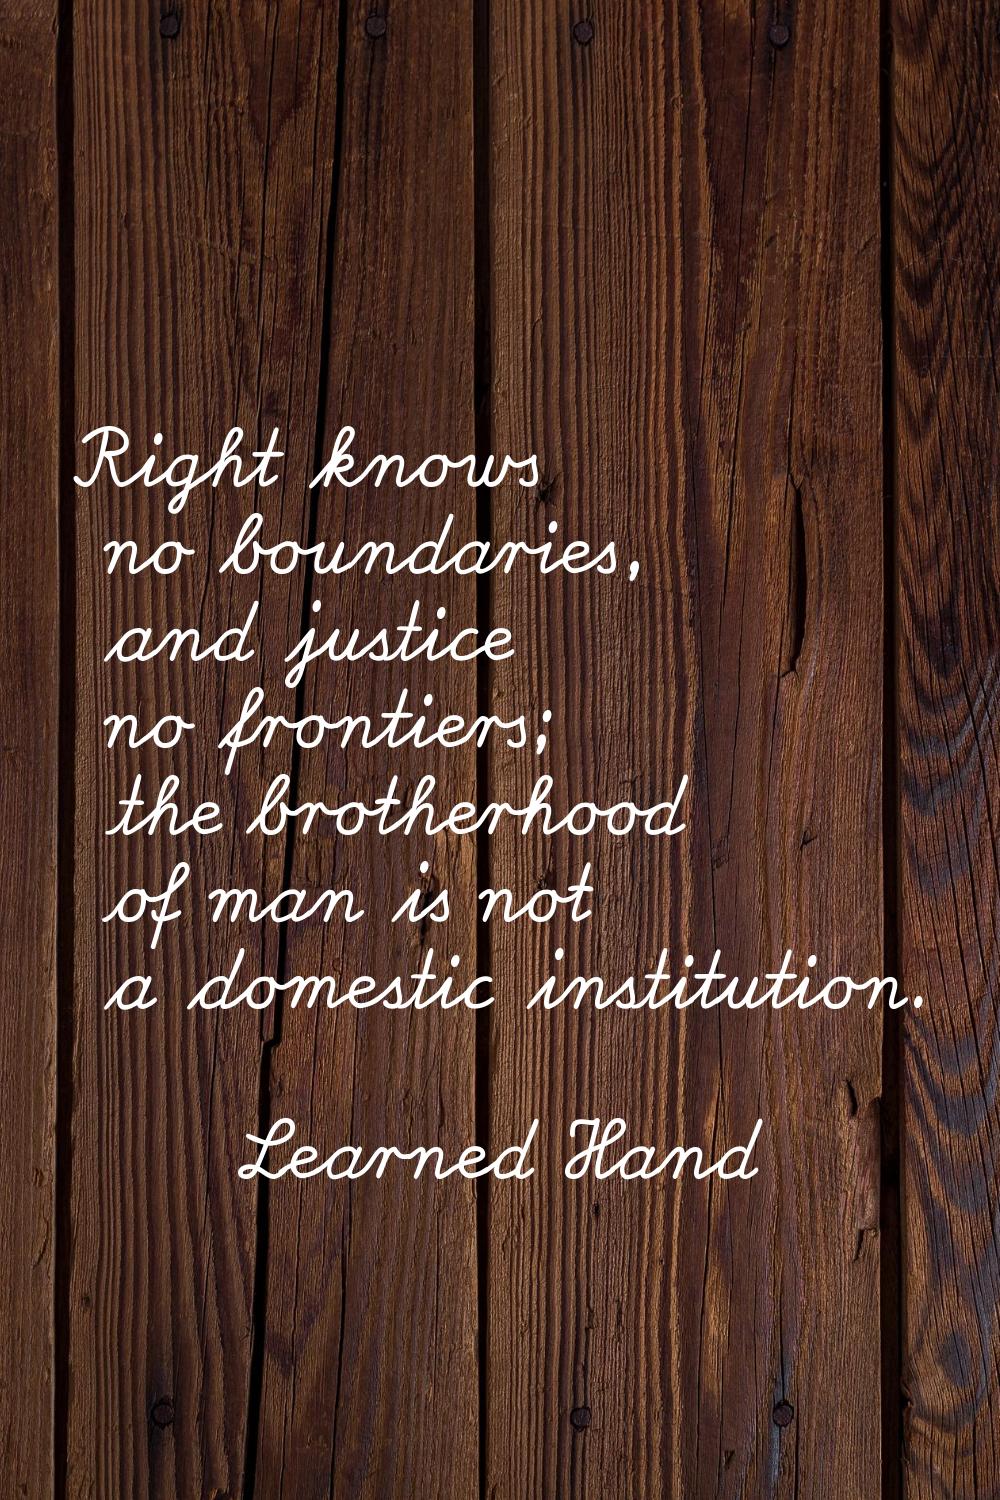 Right knows no boundaries, and justice no frontiers; the brotherhood of man is not a domestic insti